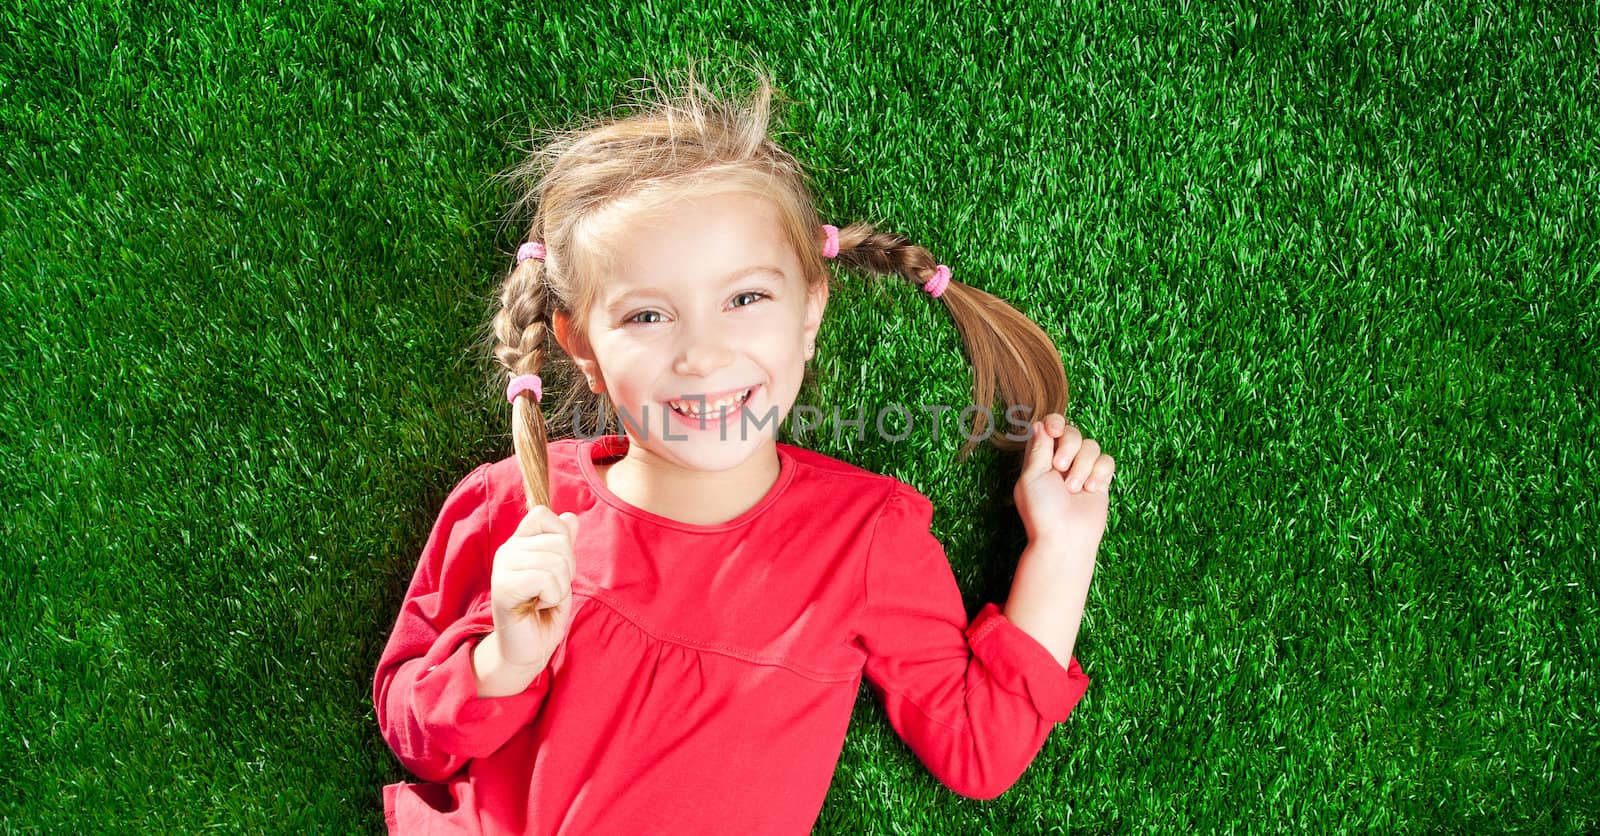 little girl smiling on a green lawn